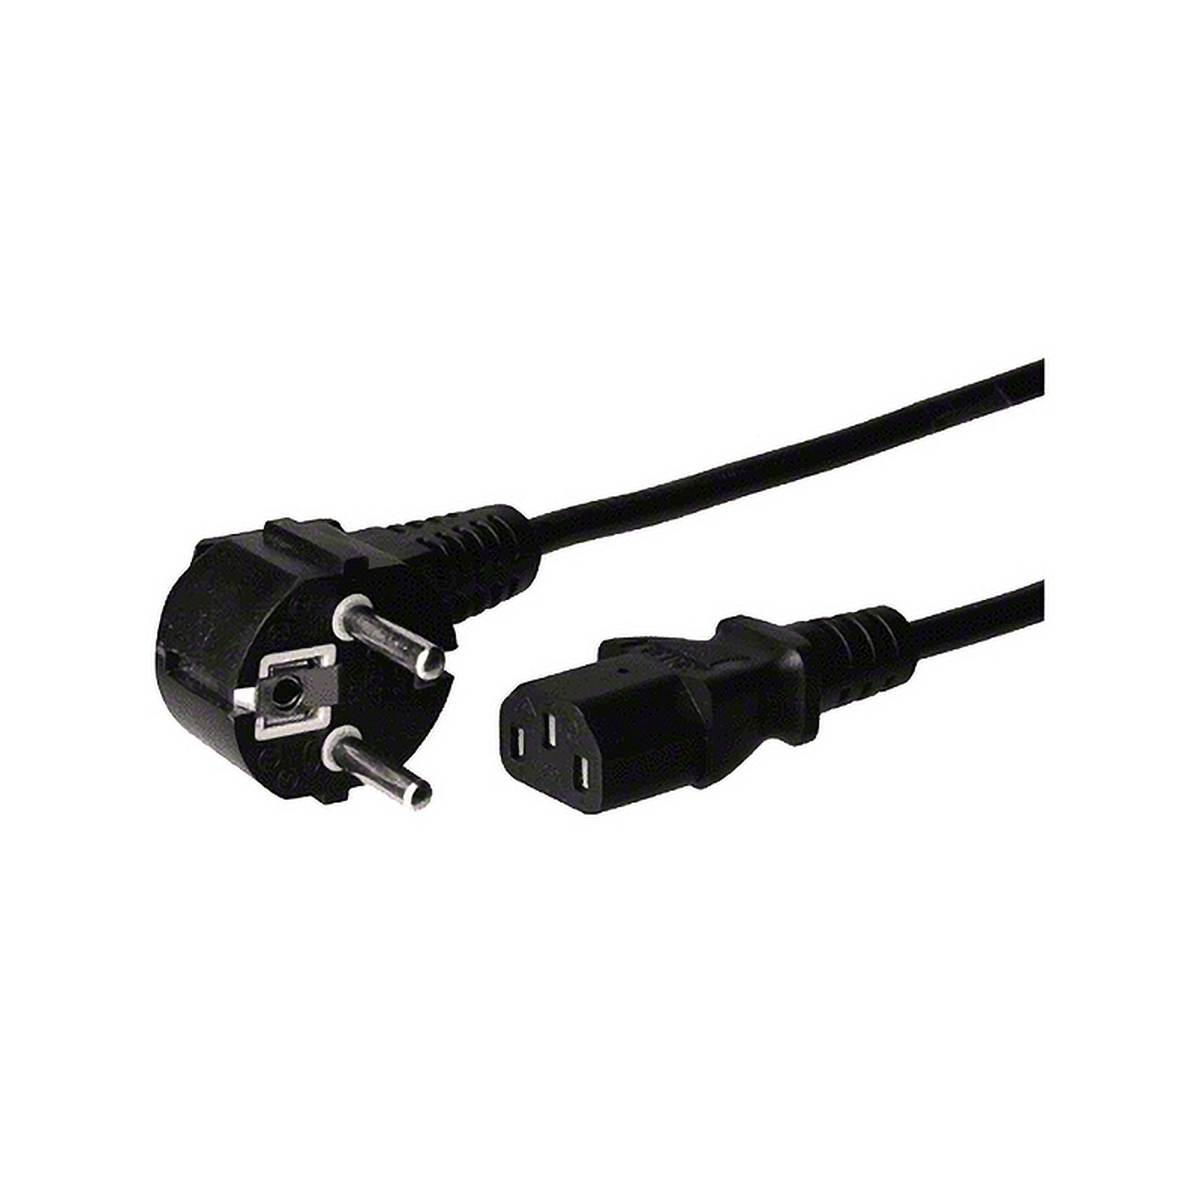 Walimex Power Cord 4m with IEC Connector